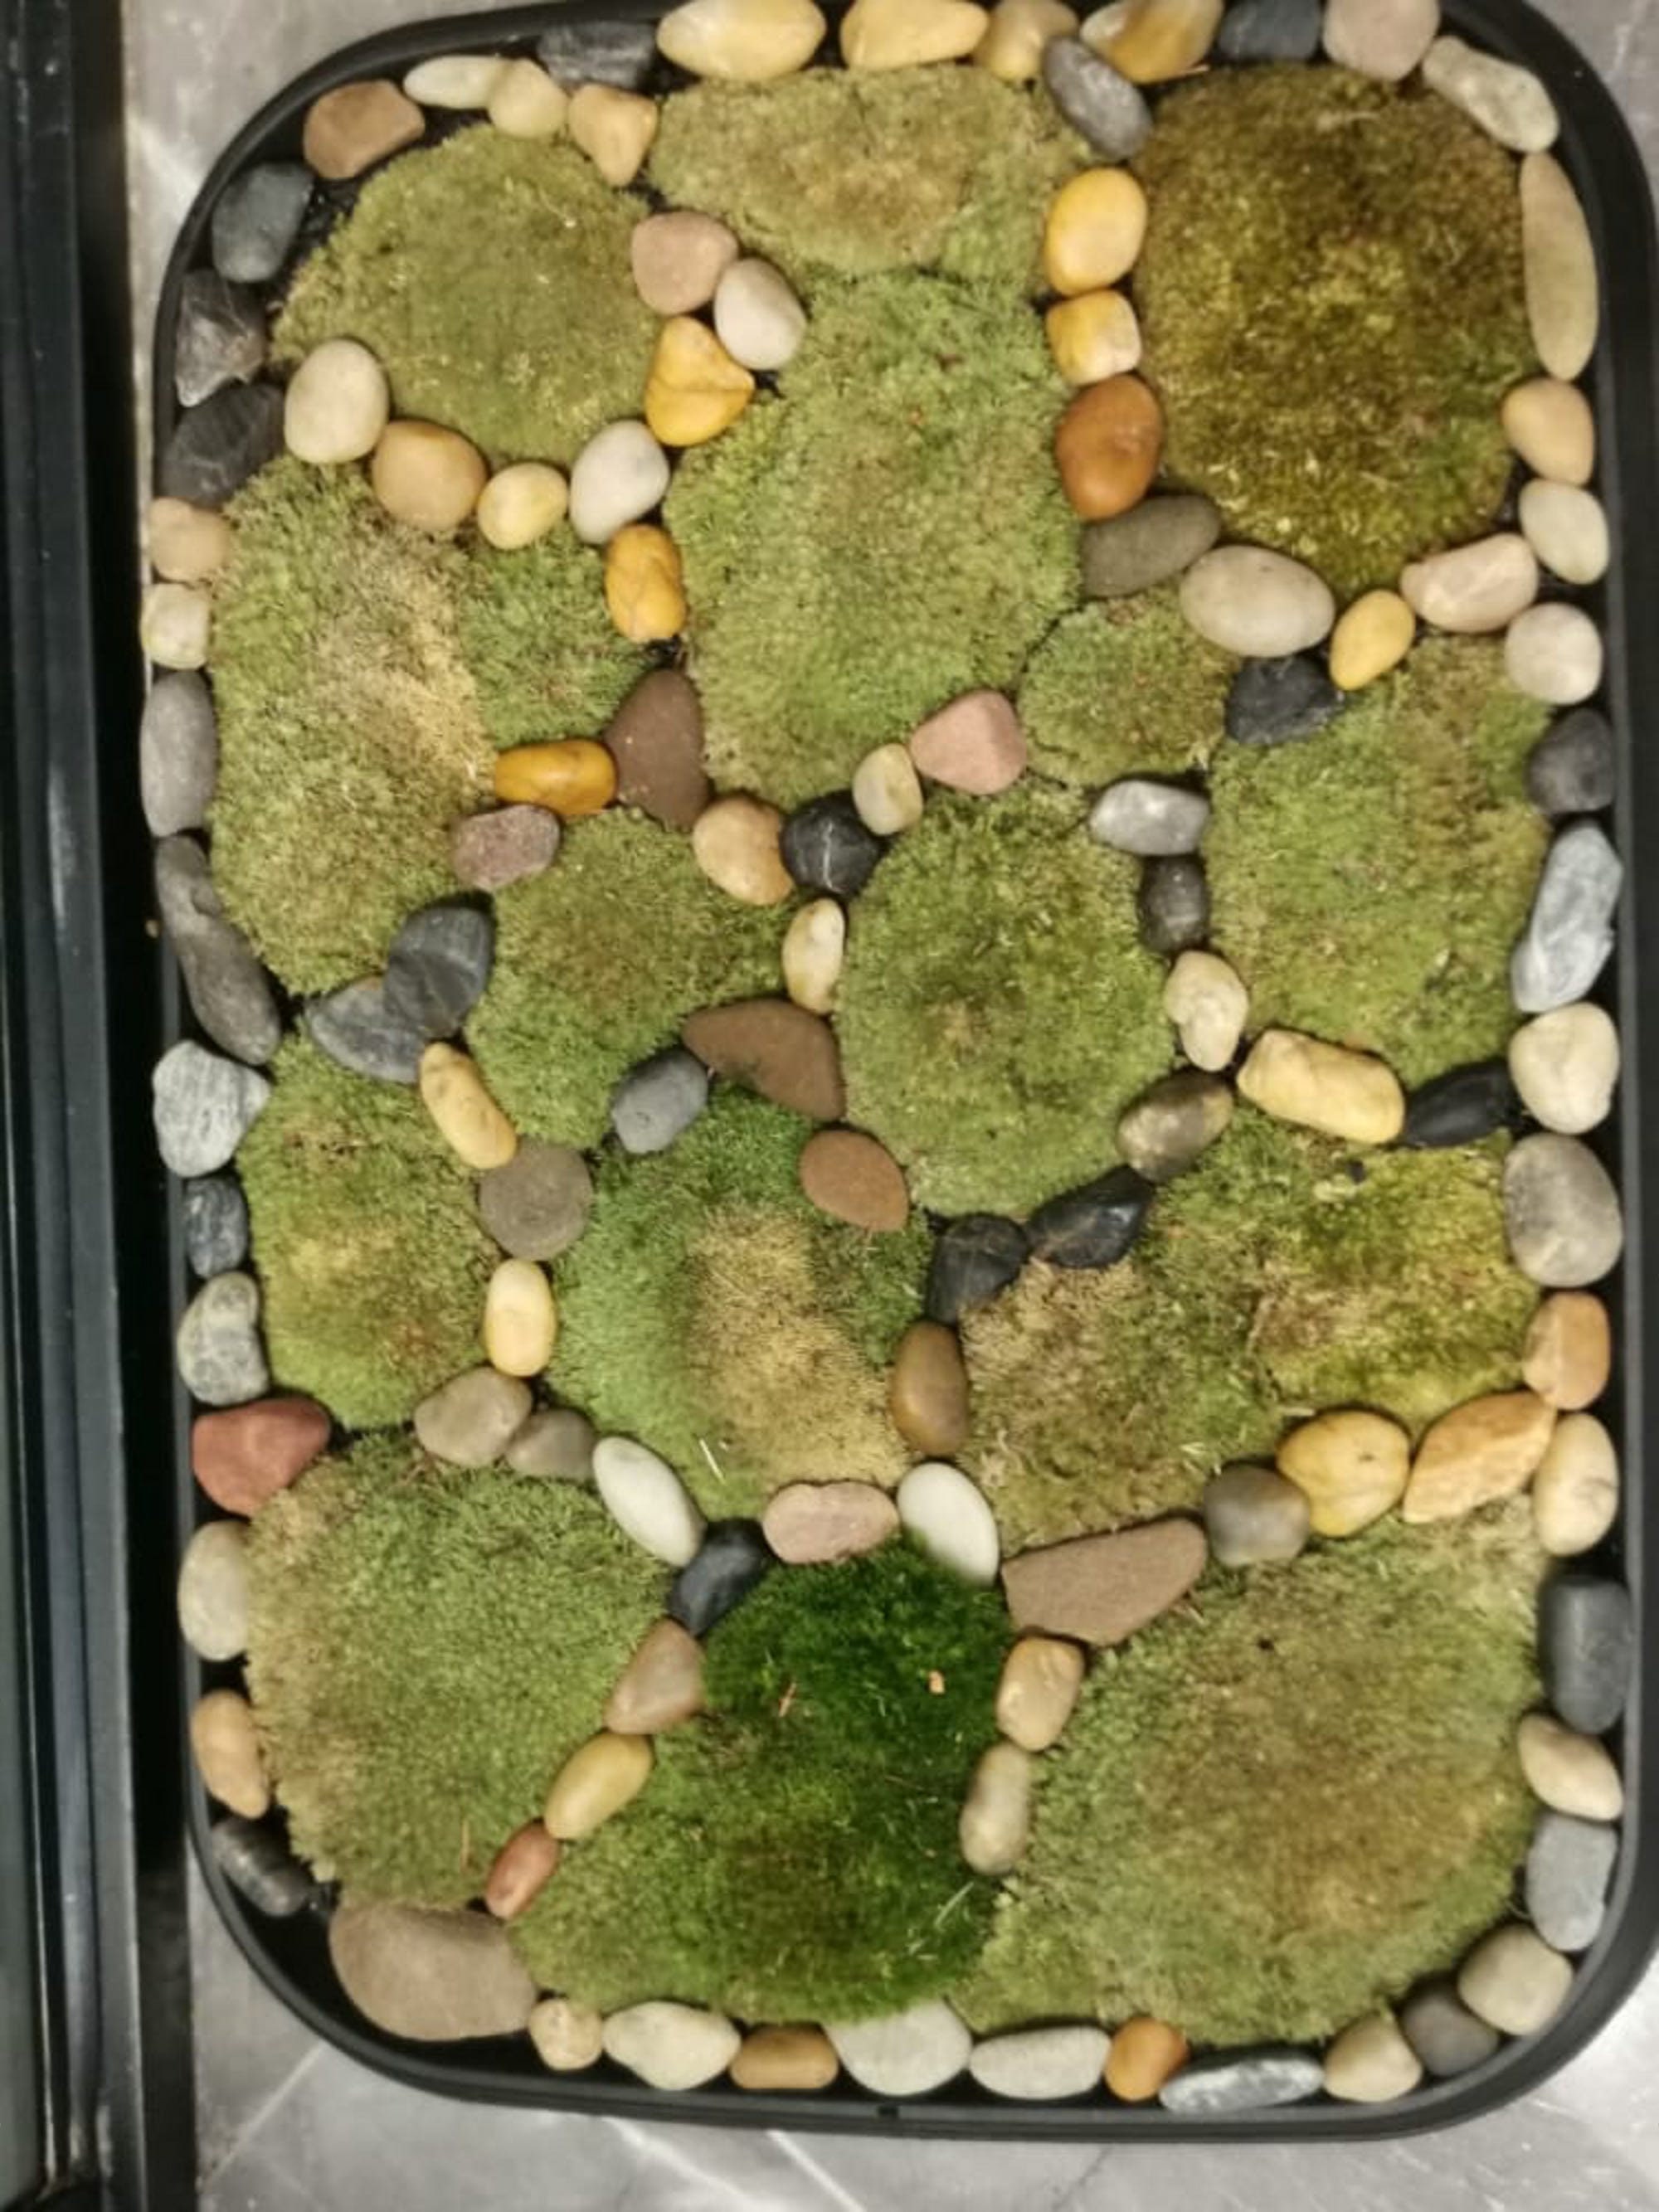 Moss Bath Mat Adds Nature To Your Bathroom - How to Make DIY Moss